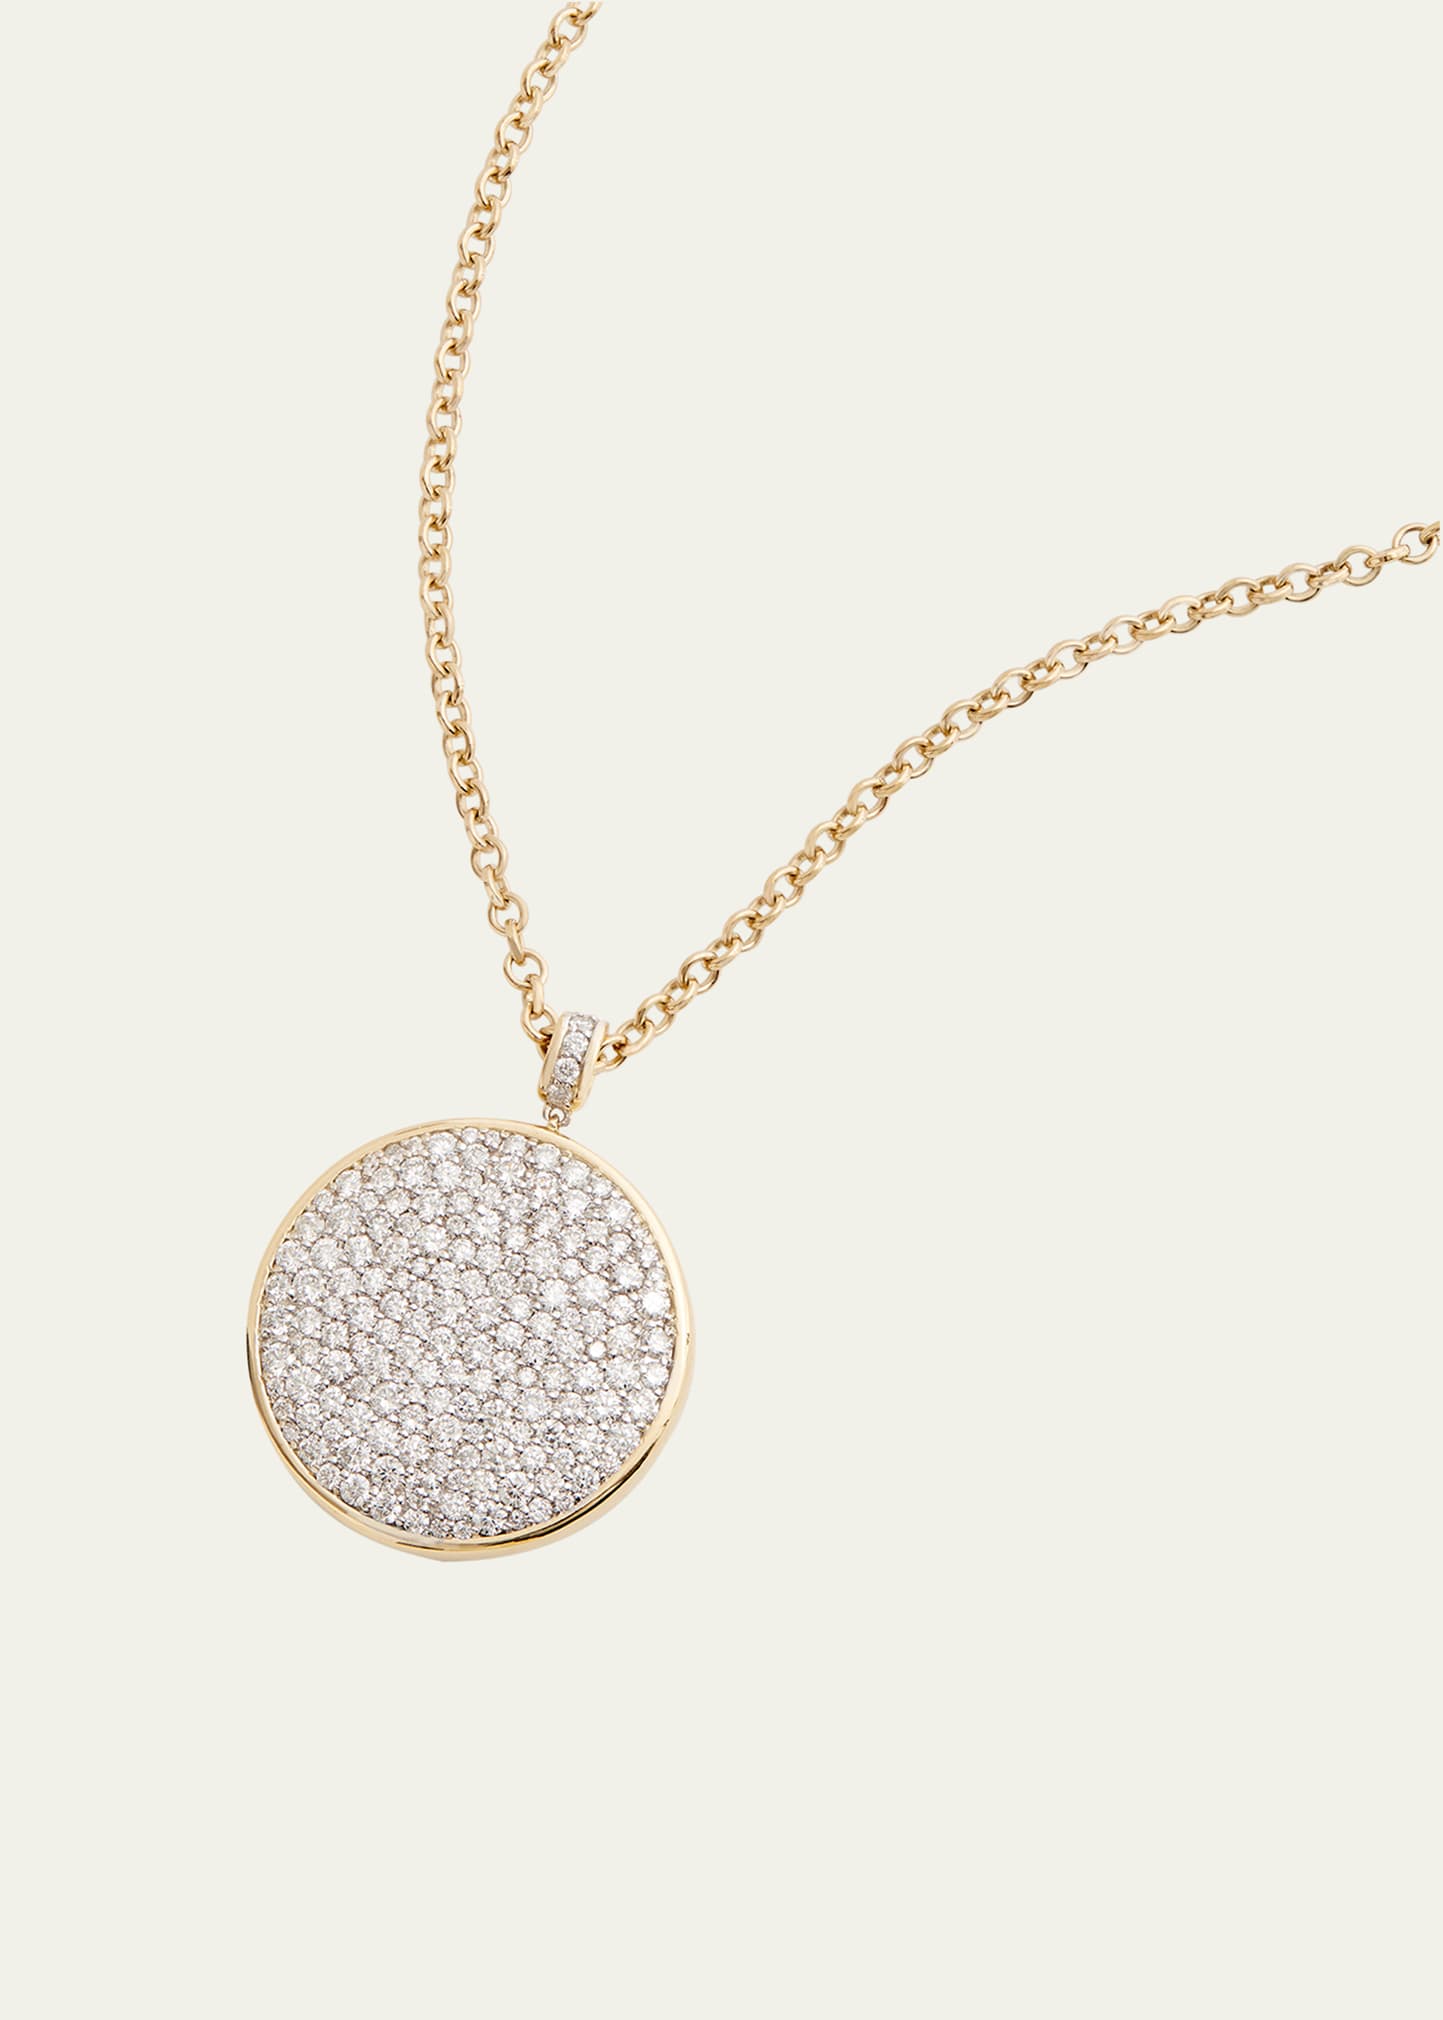 18K Large Pendant Necklace with Scattered Diamonds